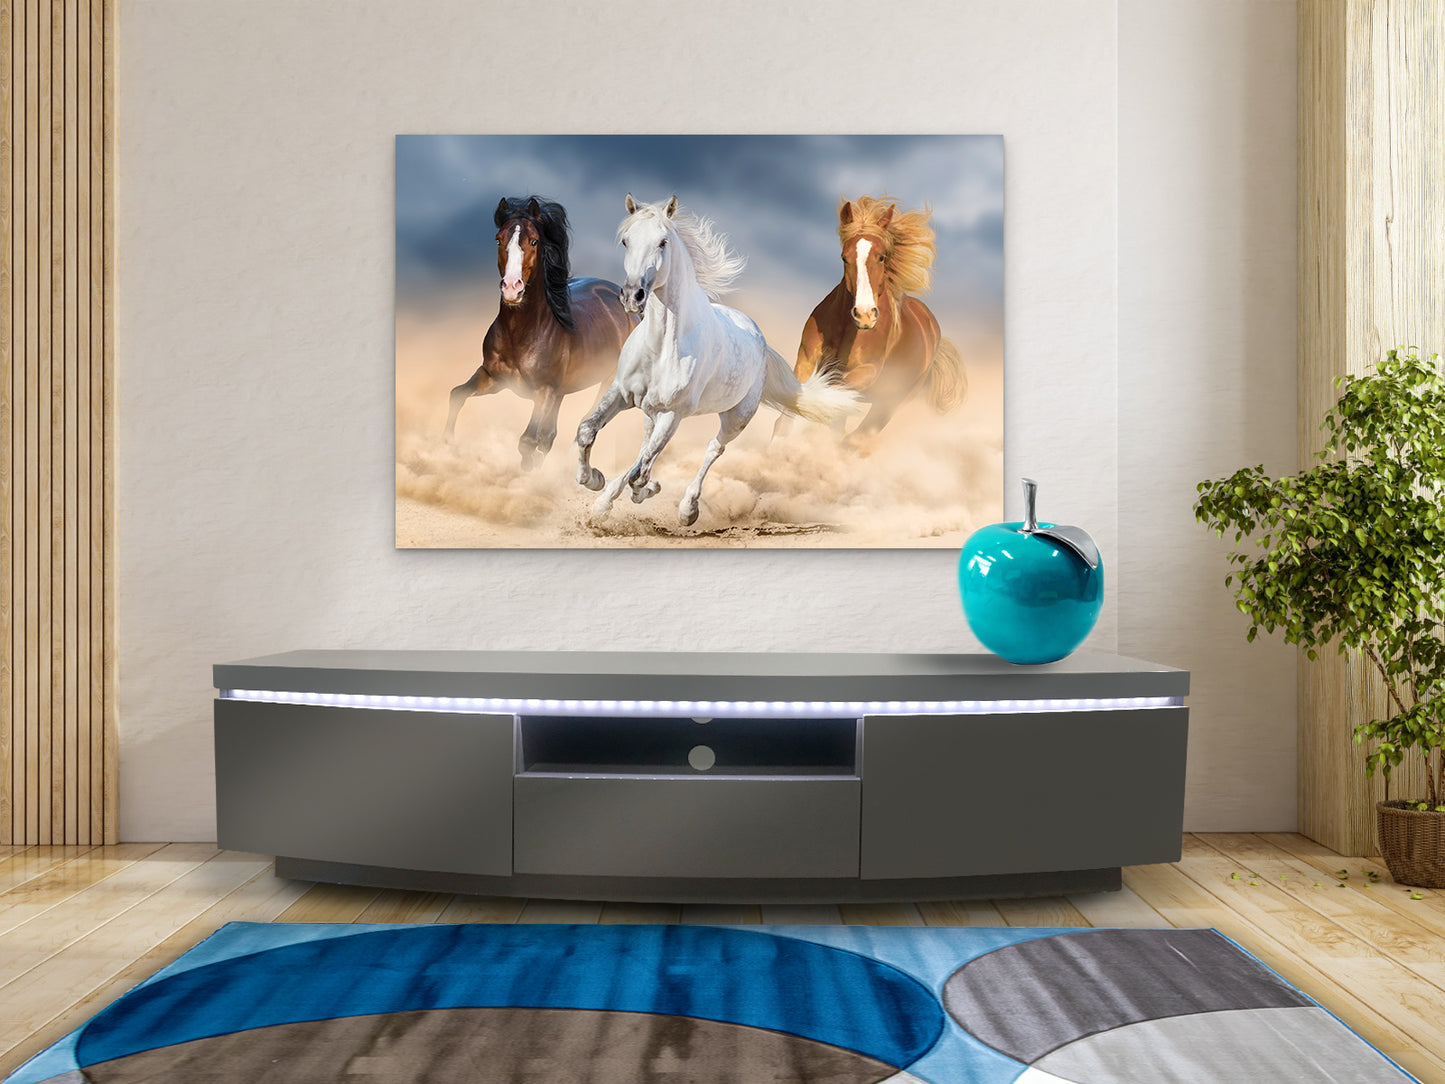 TV6158 - TV Stand